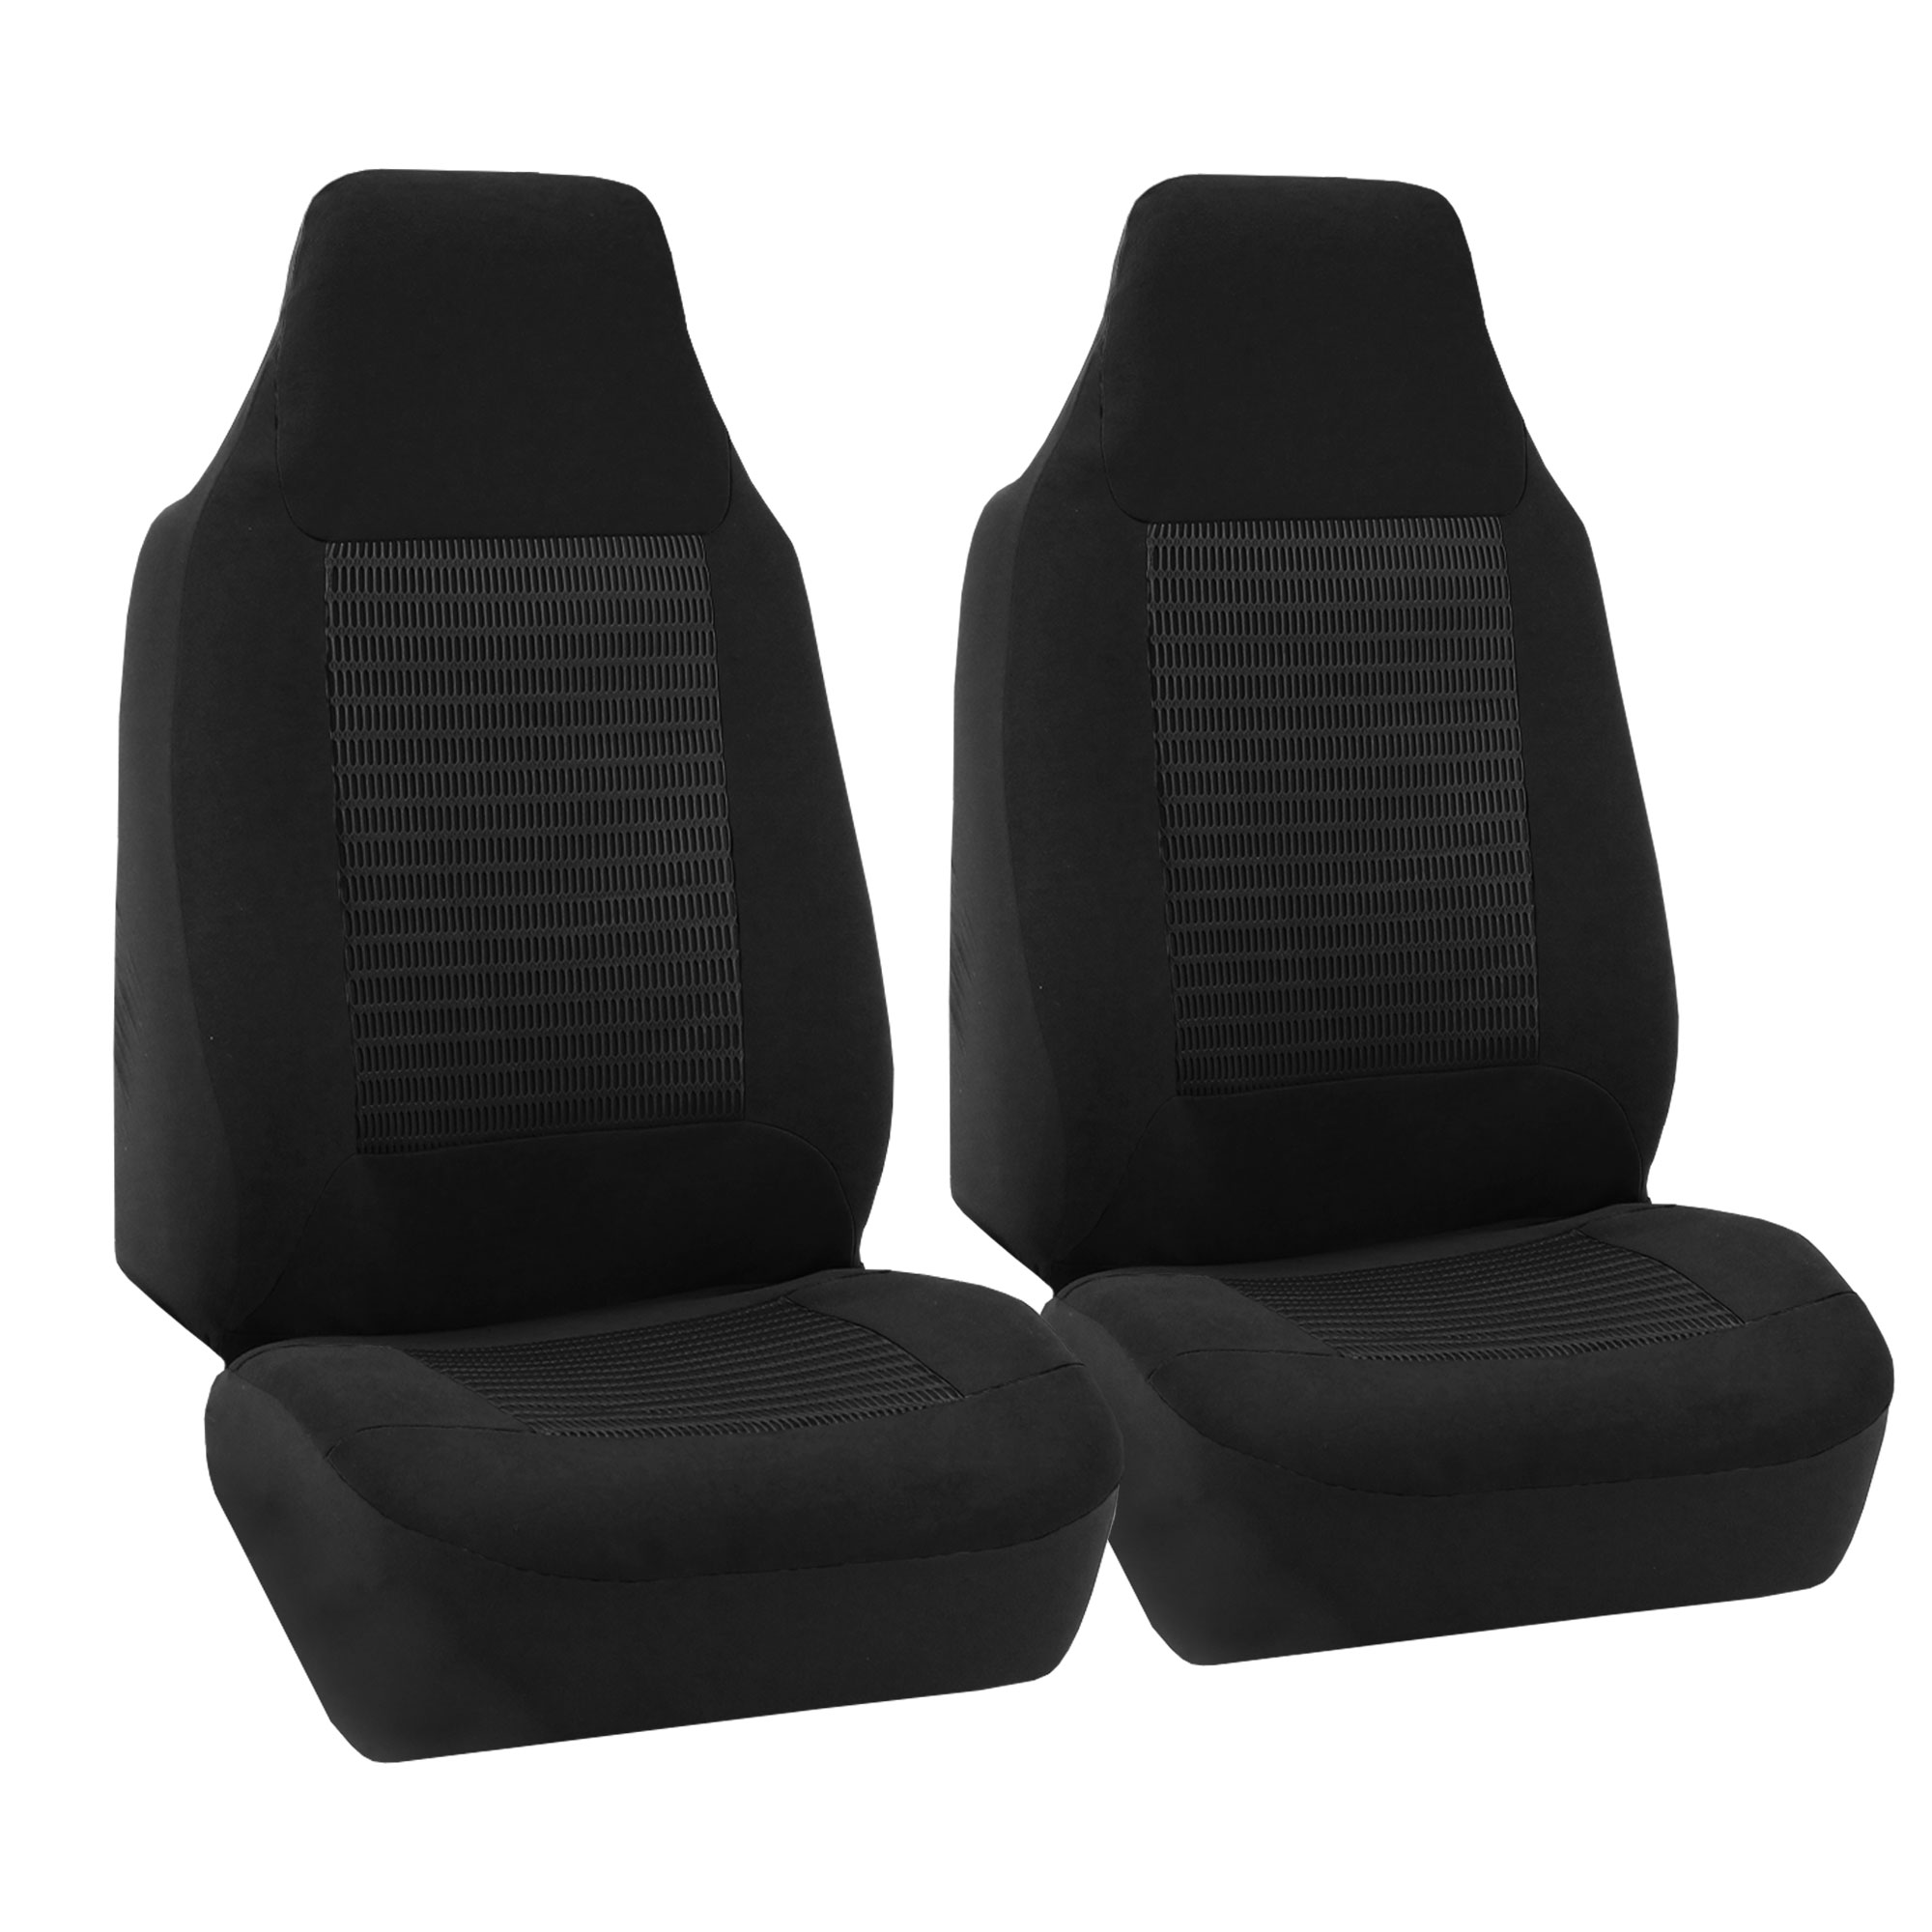 FH Group Premium Polyester Fabric Black Full Set Car Seat Cover with Air Freshener - image 3 of 6